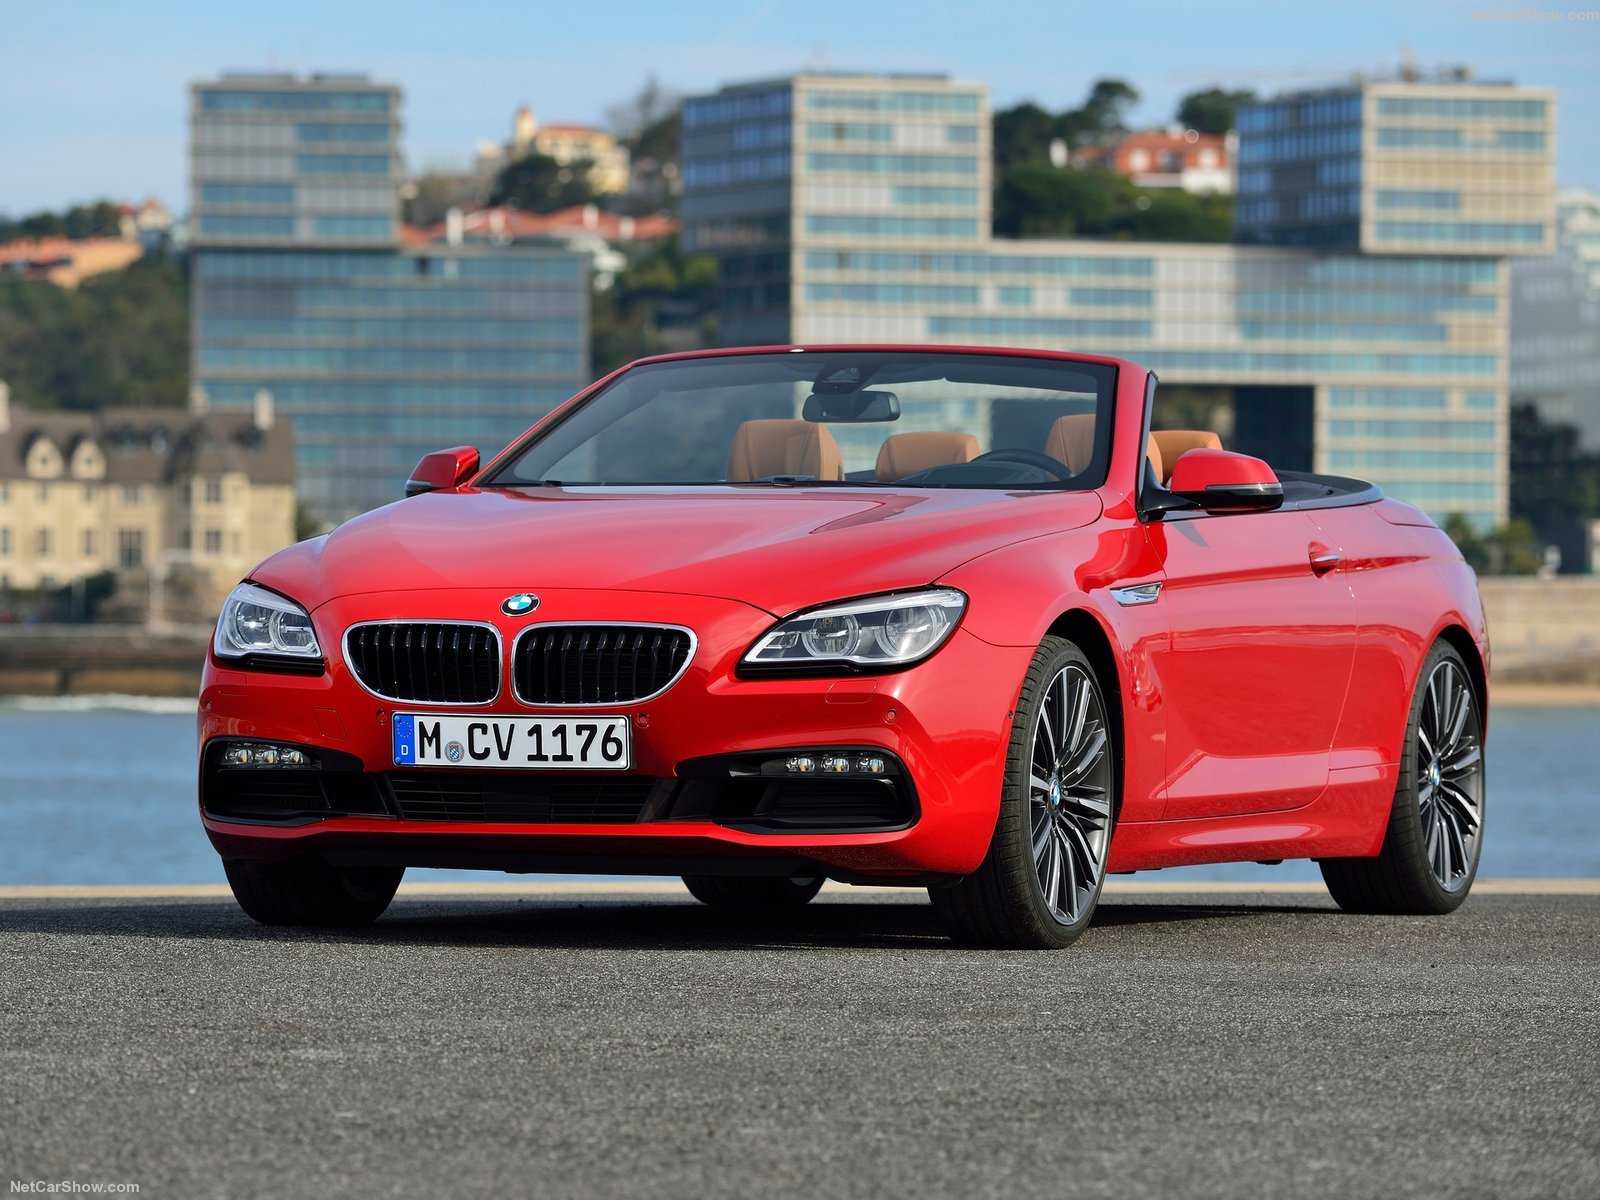 2015, 6 series, Bmw, Cabriolet, Cars, Convertible, Facelift Wallpaper